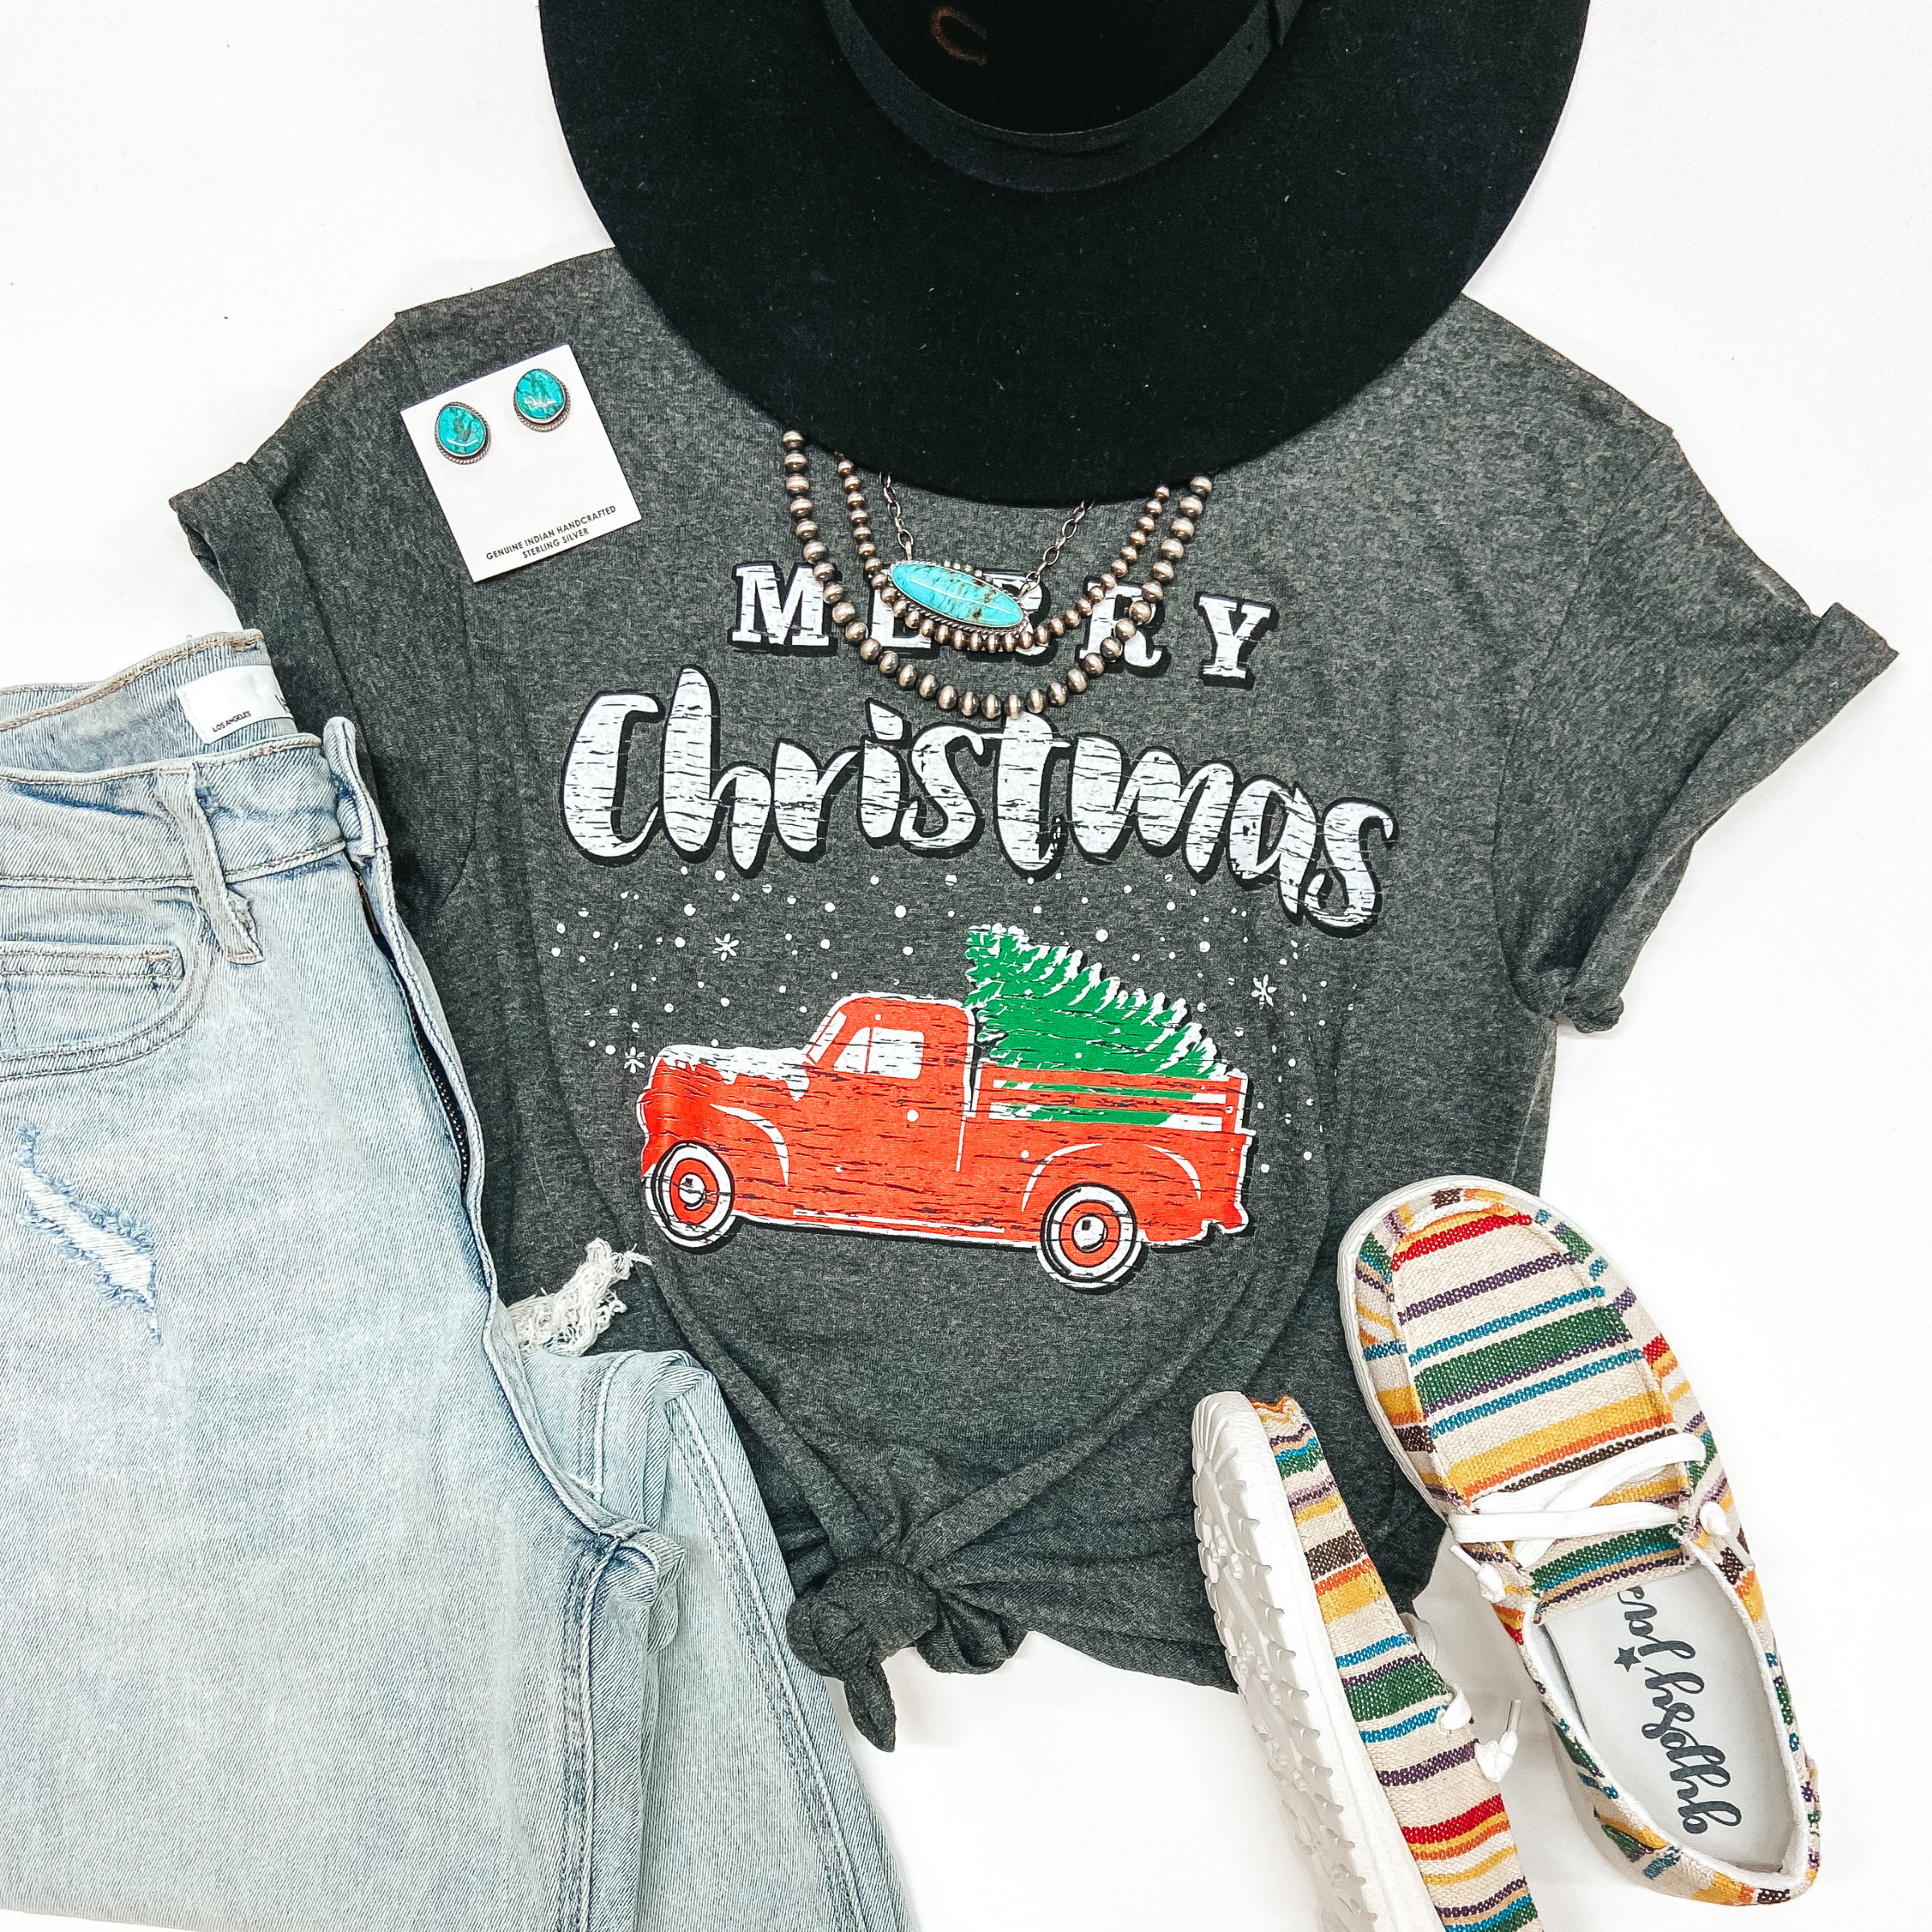 Merry Christmas Pick Up Truck Short Sleeve Graphic Tee in Charcoal Heather Grey - Giddy Up Glamour Boutique